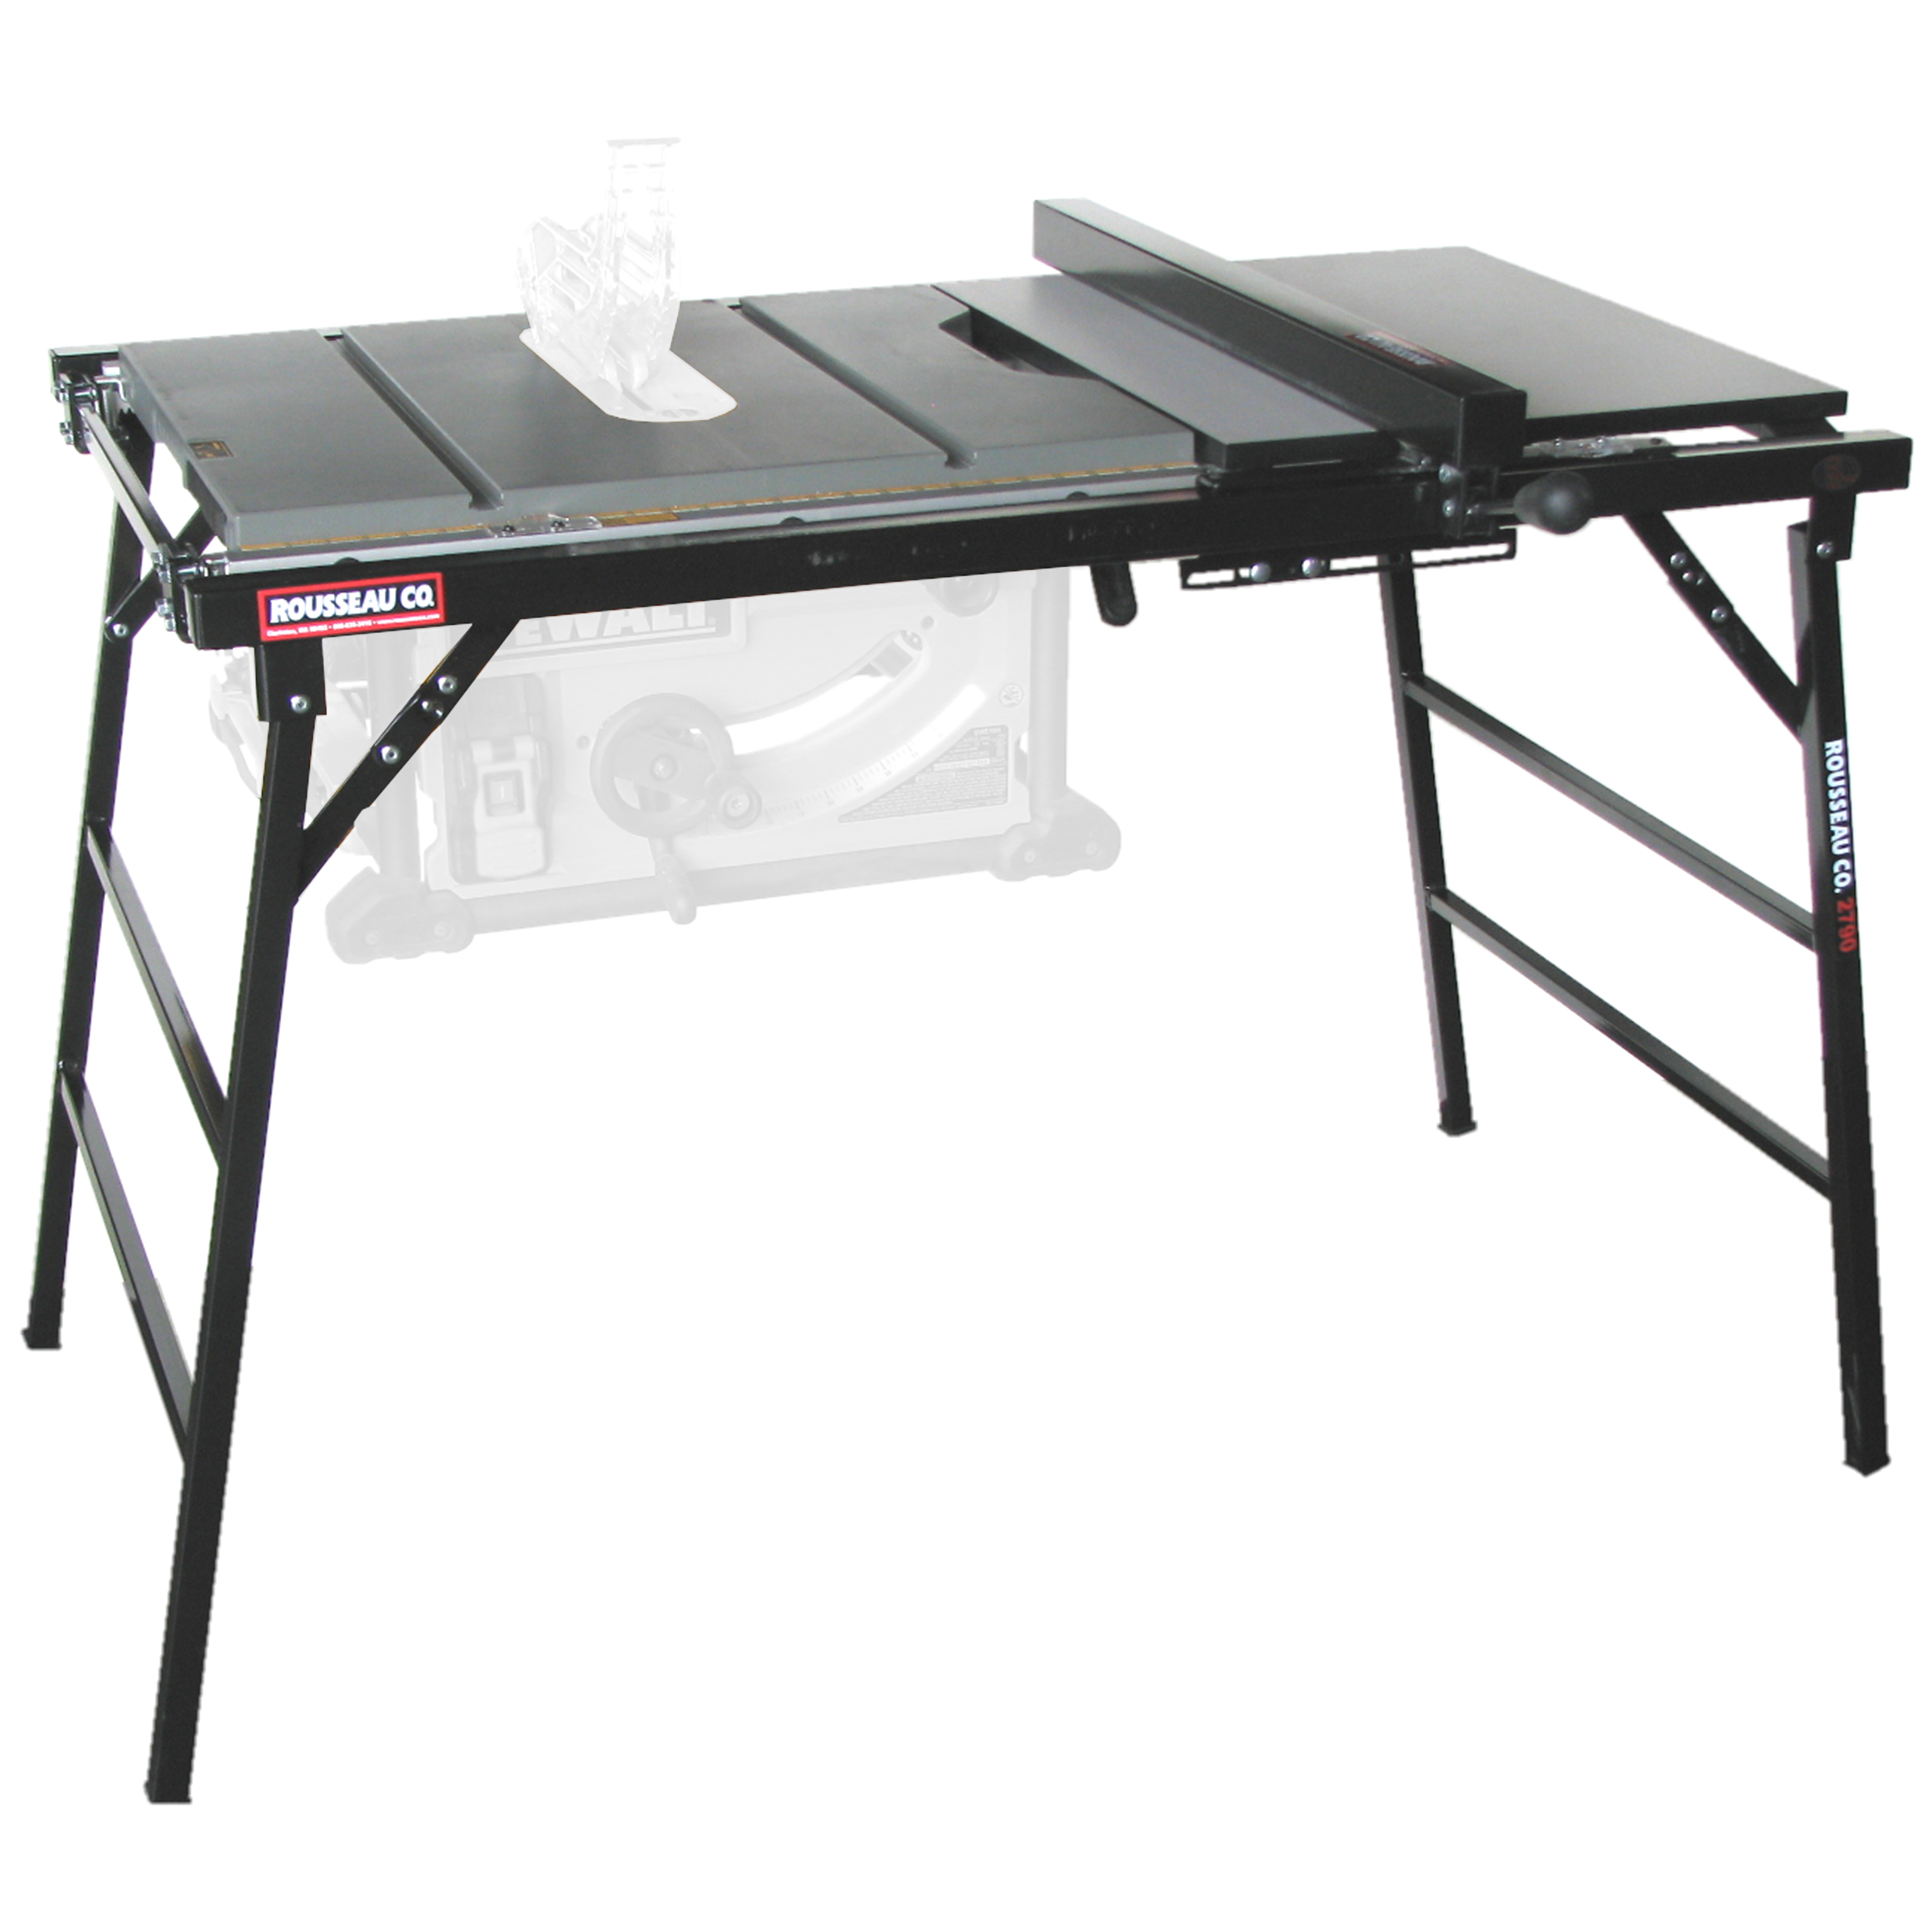 Portamax Model 2790 Table Saw Stand